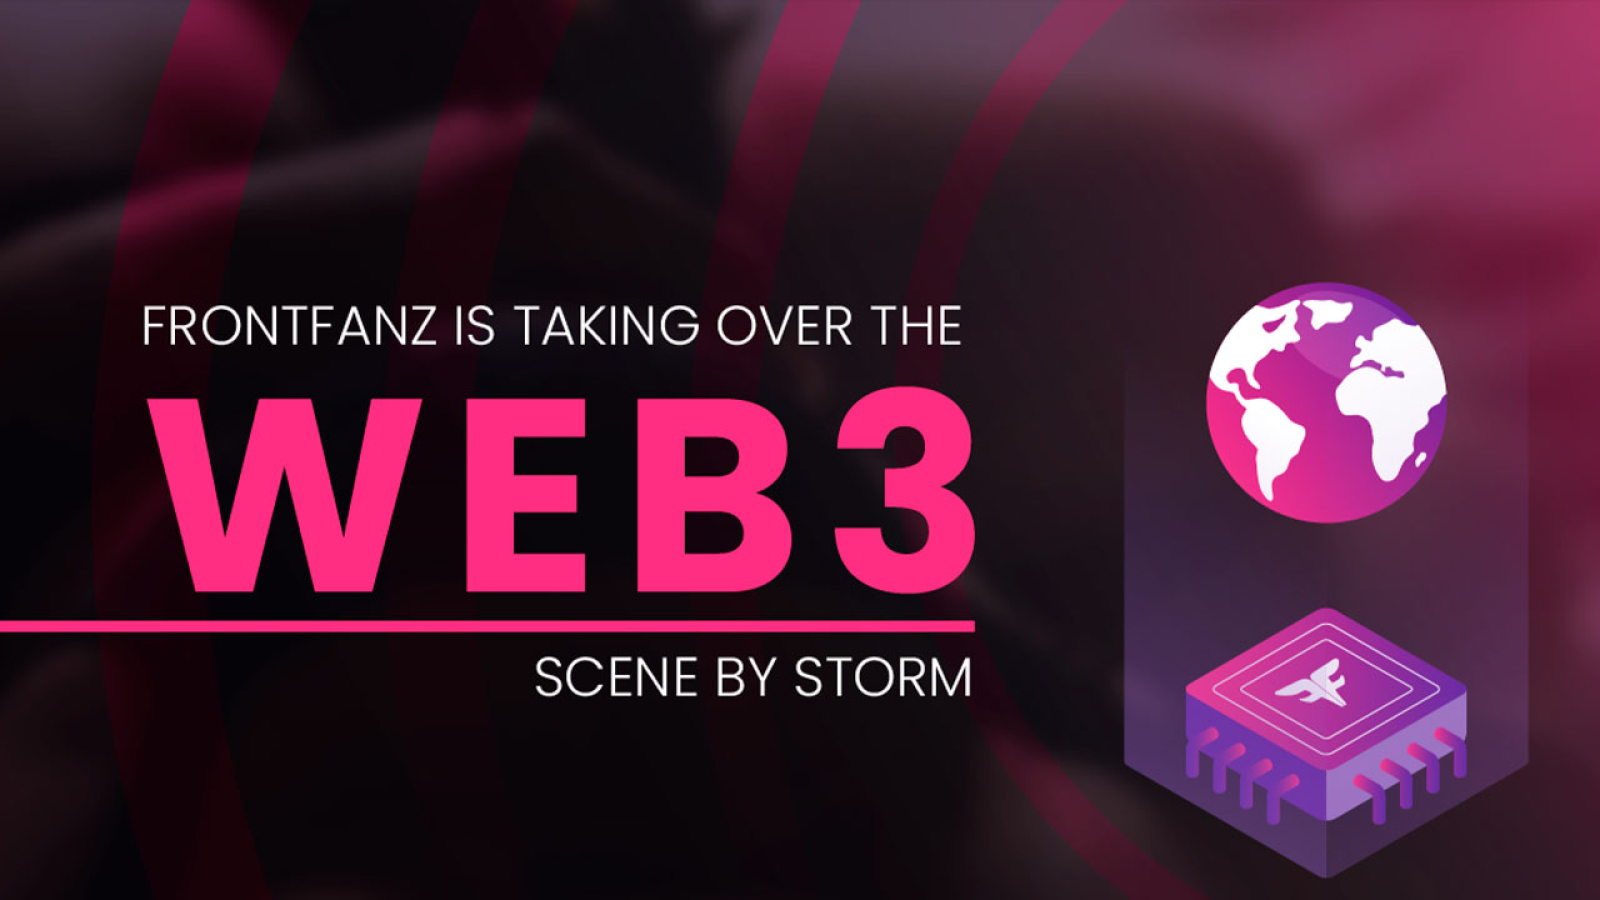 FrontFanz Is Taking Over The Web3 Scene By Storm